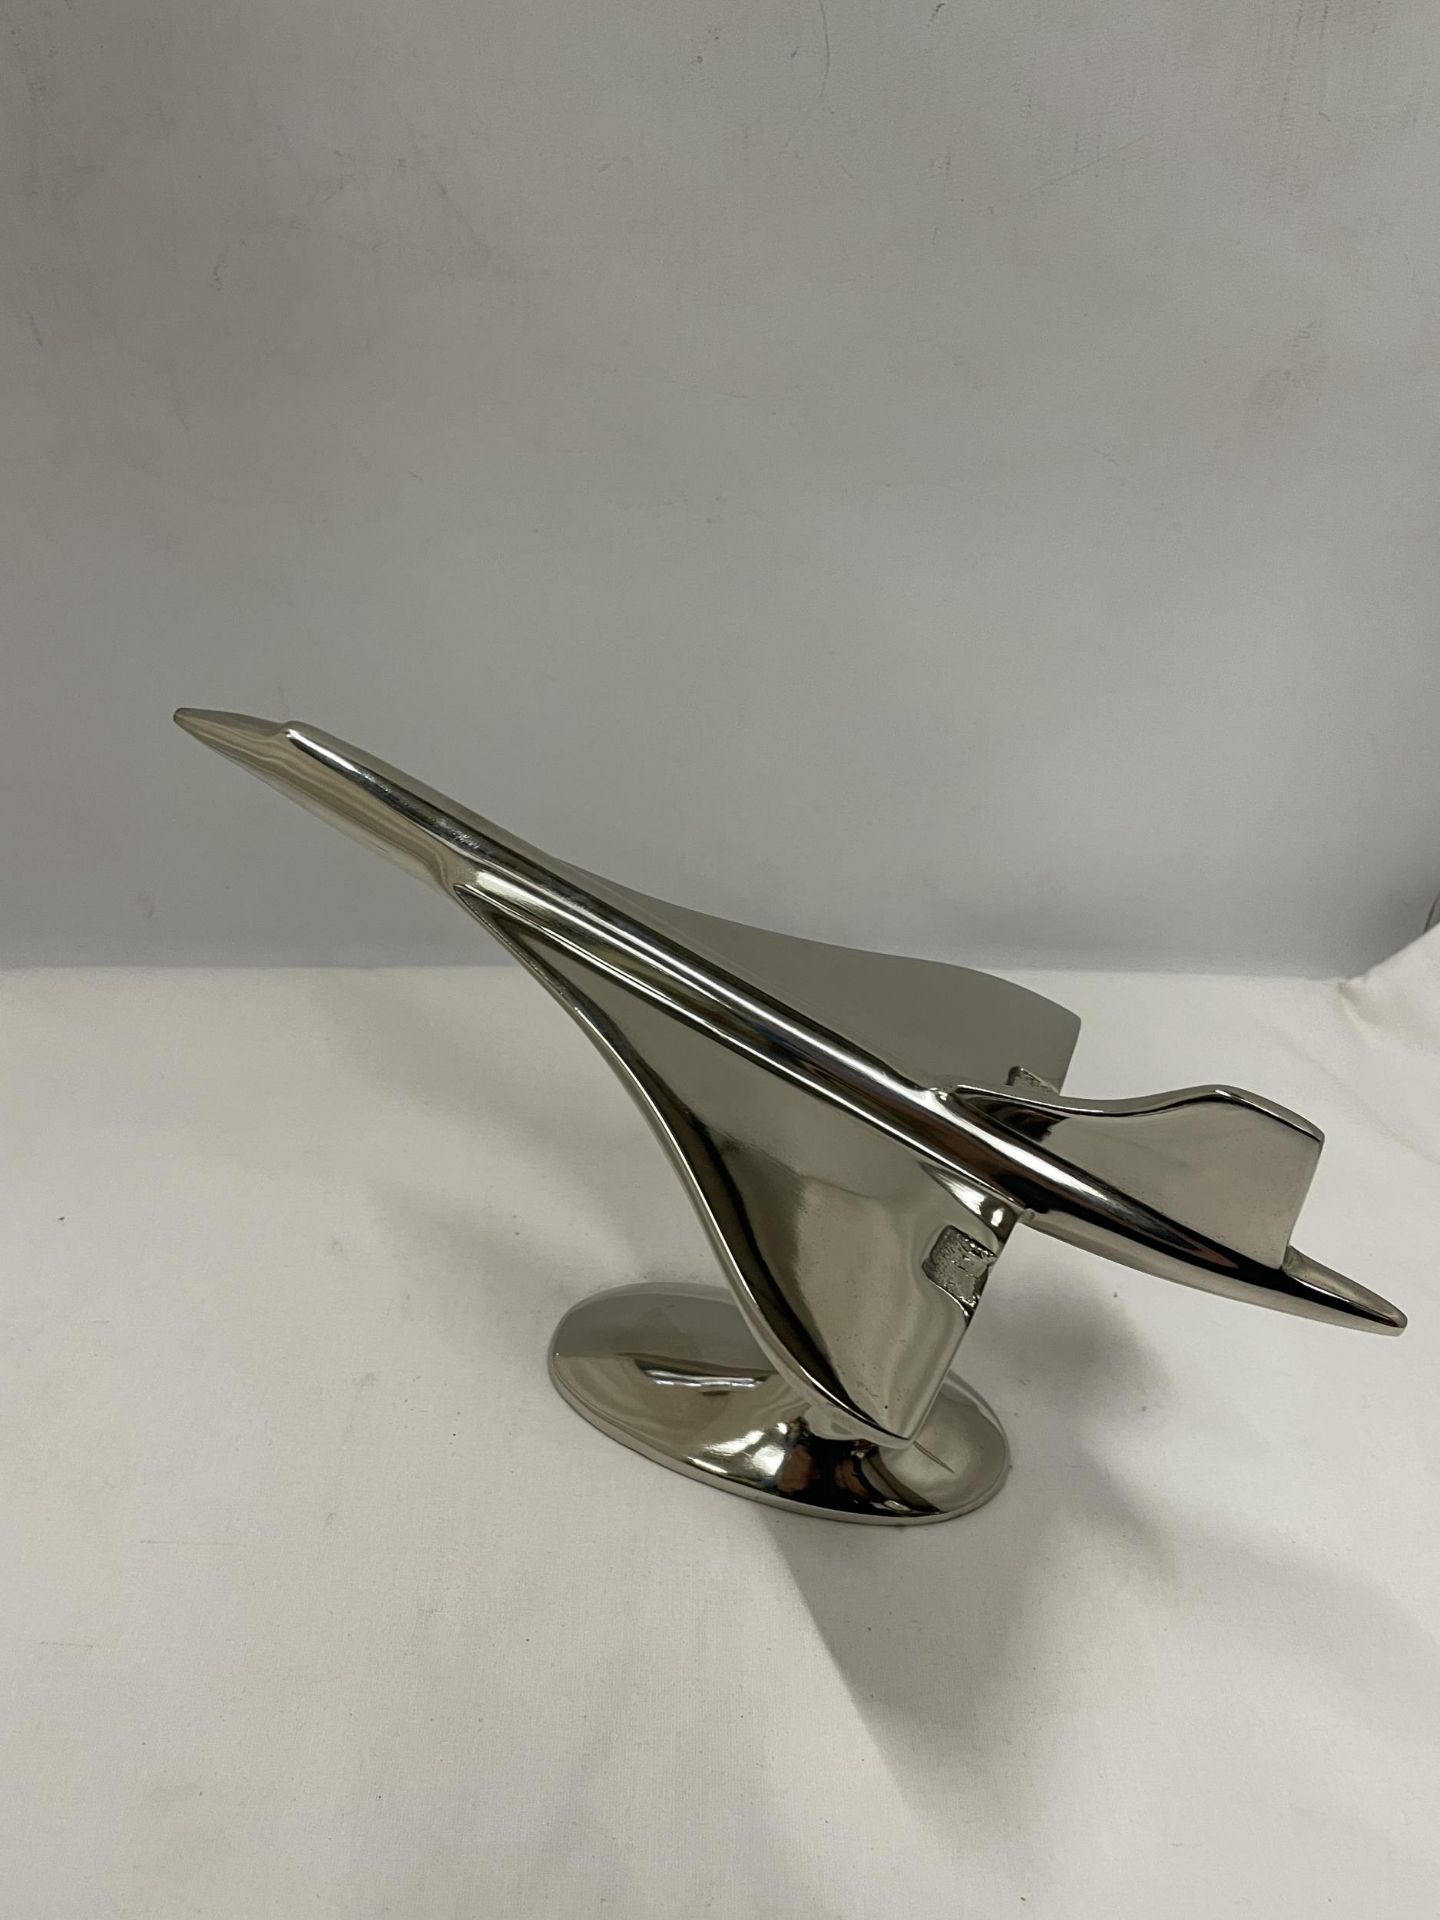 A CHROME CONCORDE ON A STAND